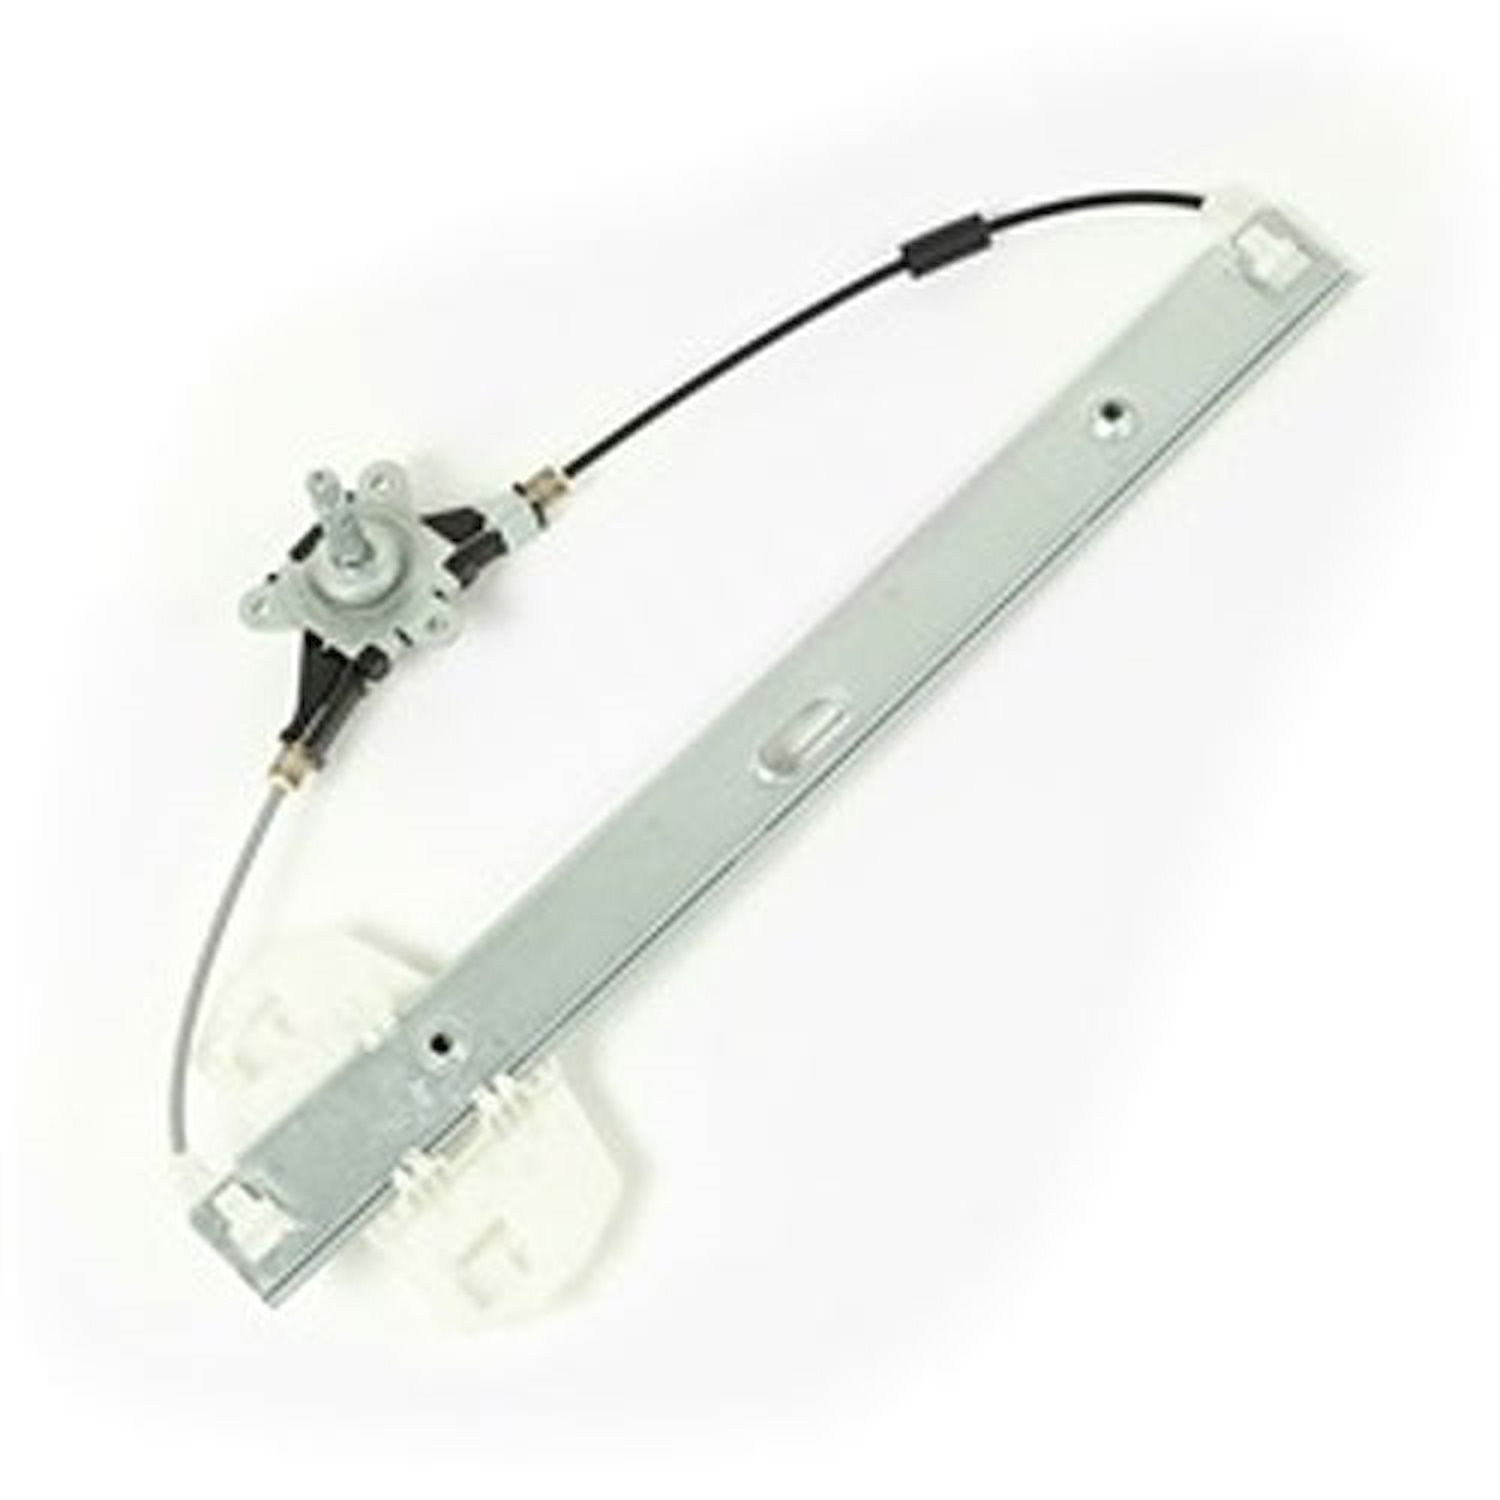 This left front manual window regulator from Omix-ADA